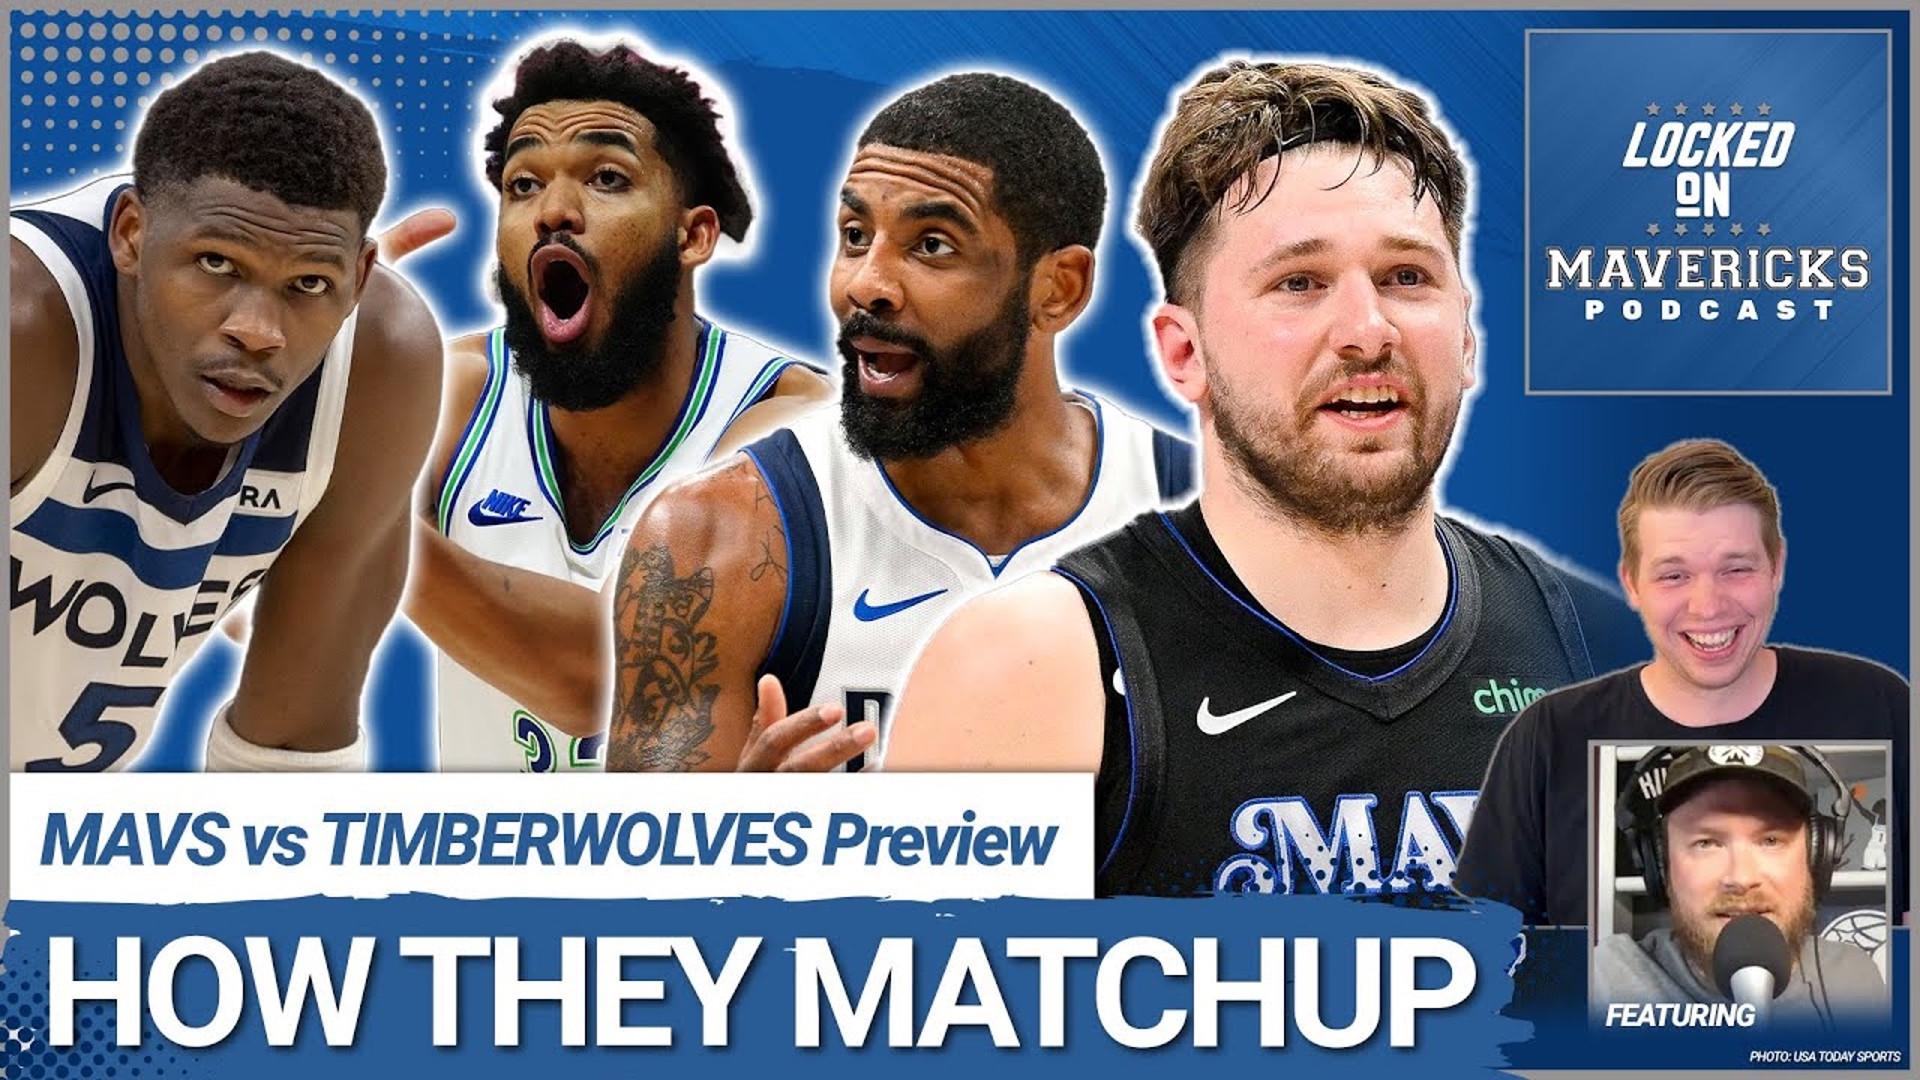 Nick Angstadt is again joined by Ben Beecken of Locked On Wolvesto break down the Dallas Mavericks-Minnesota Timberwolves matchup in the Western Conference Finals.